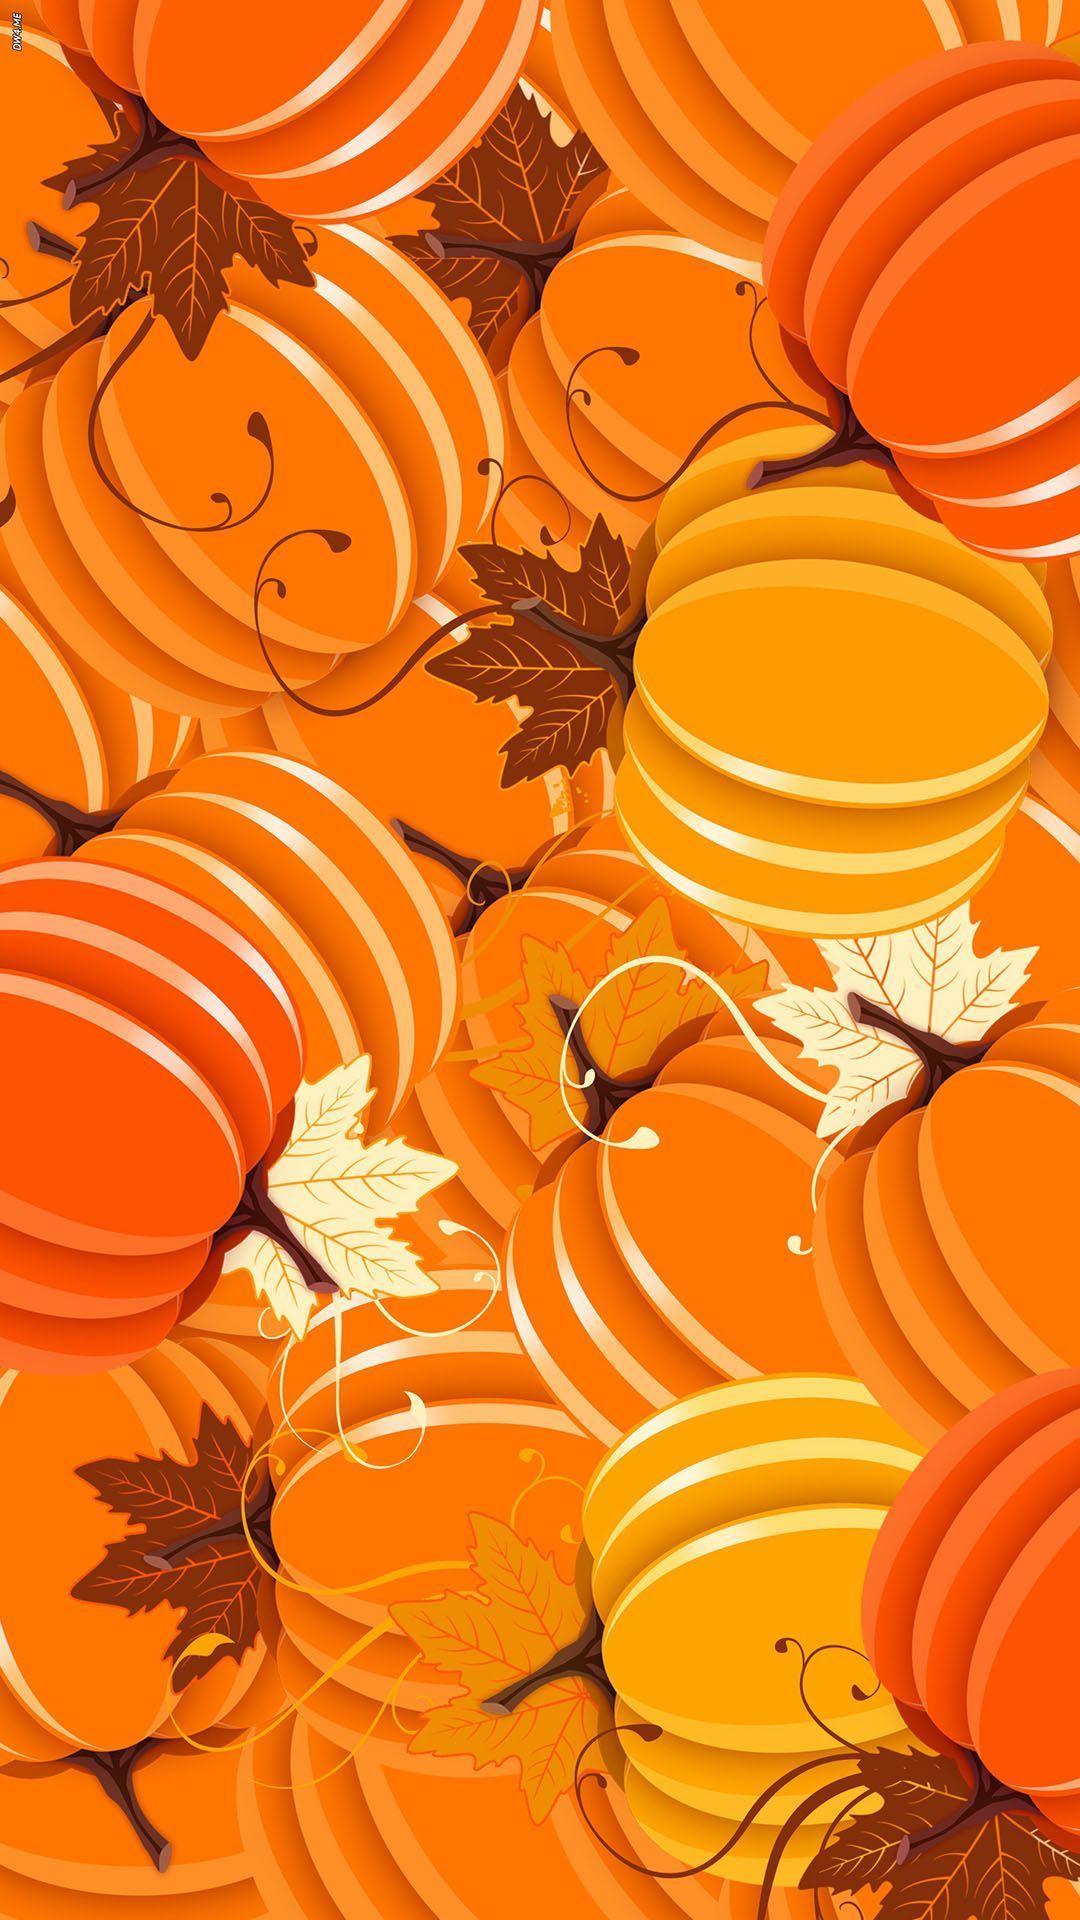 Downloaded from Girly Wallpaper. itunes.apple.com/. Thousands of HD girly wa., #Downlo. Thanksgiving wallpaper, Fall wallpaper, Halloween wallpaper